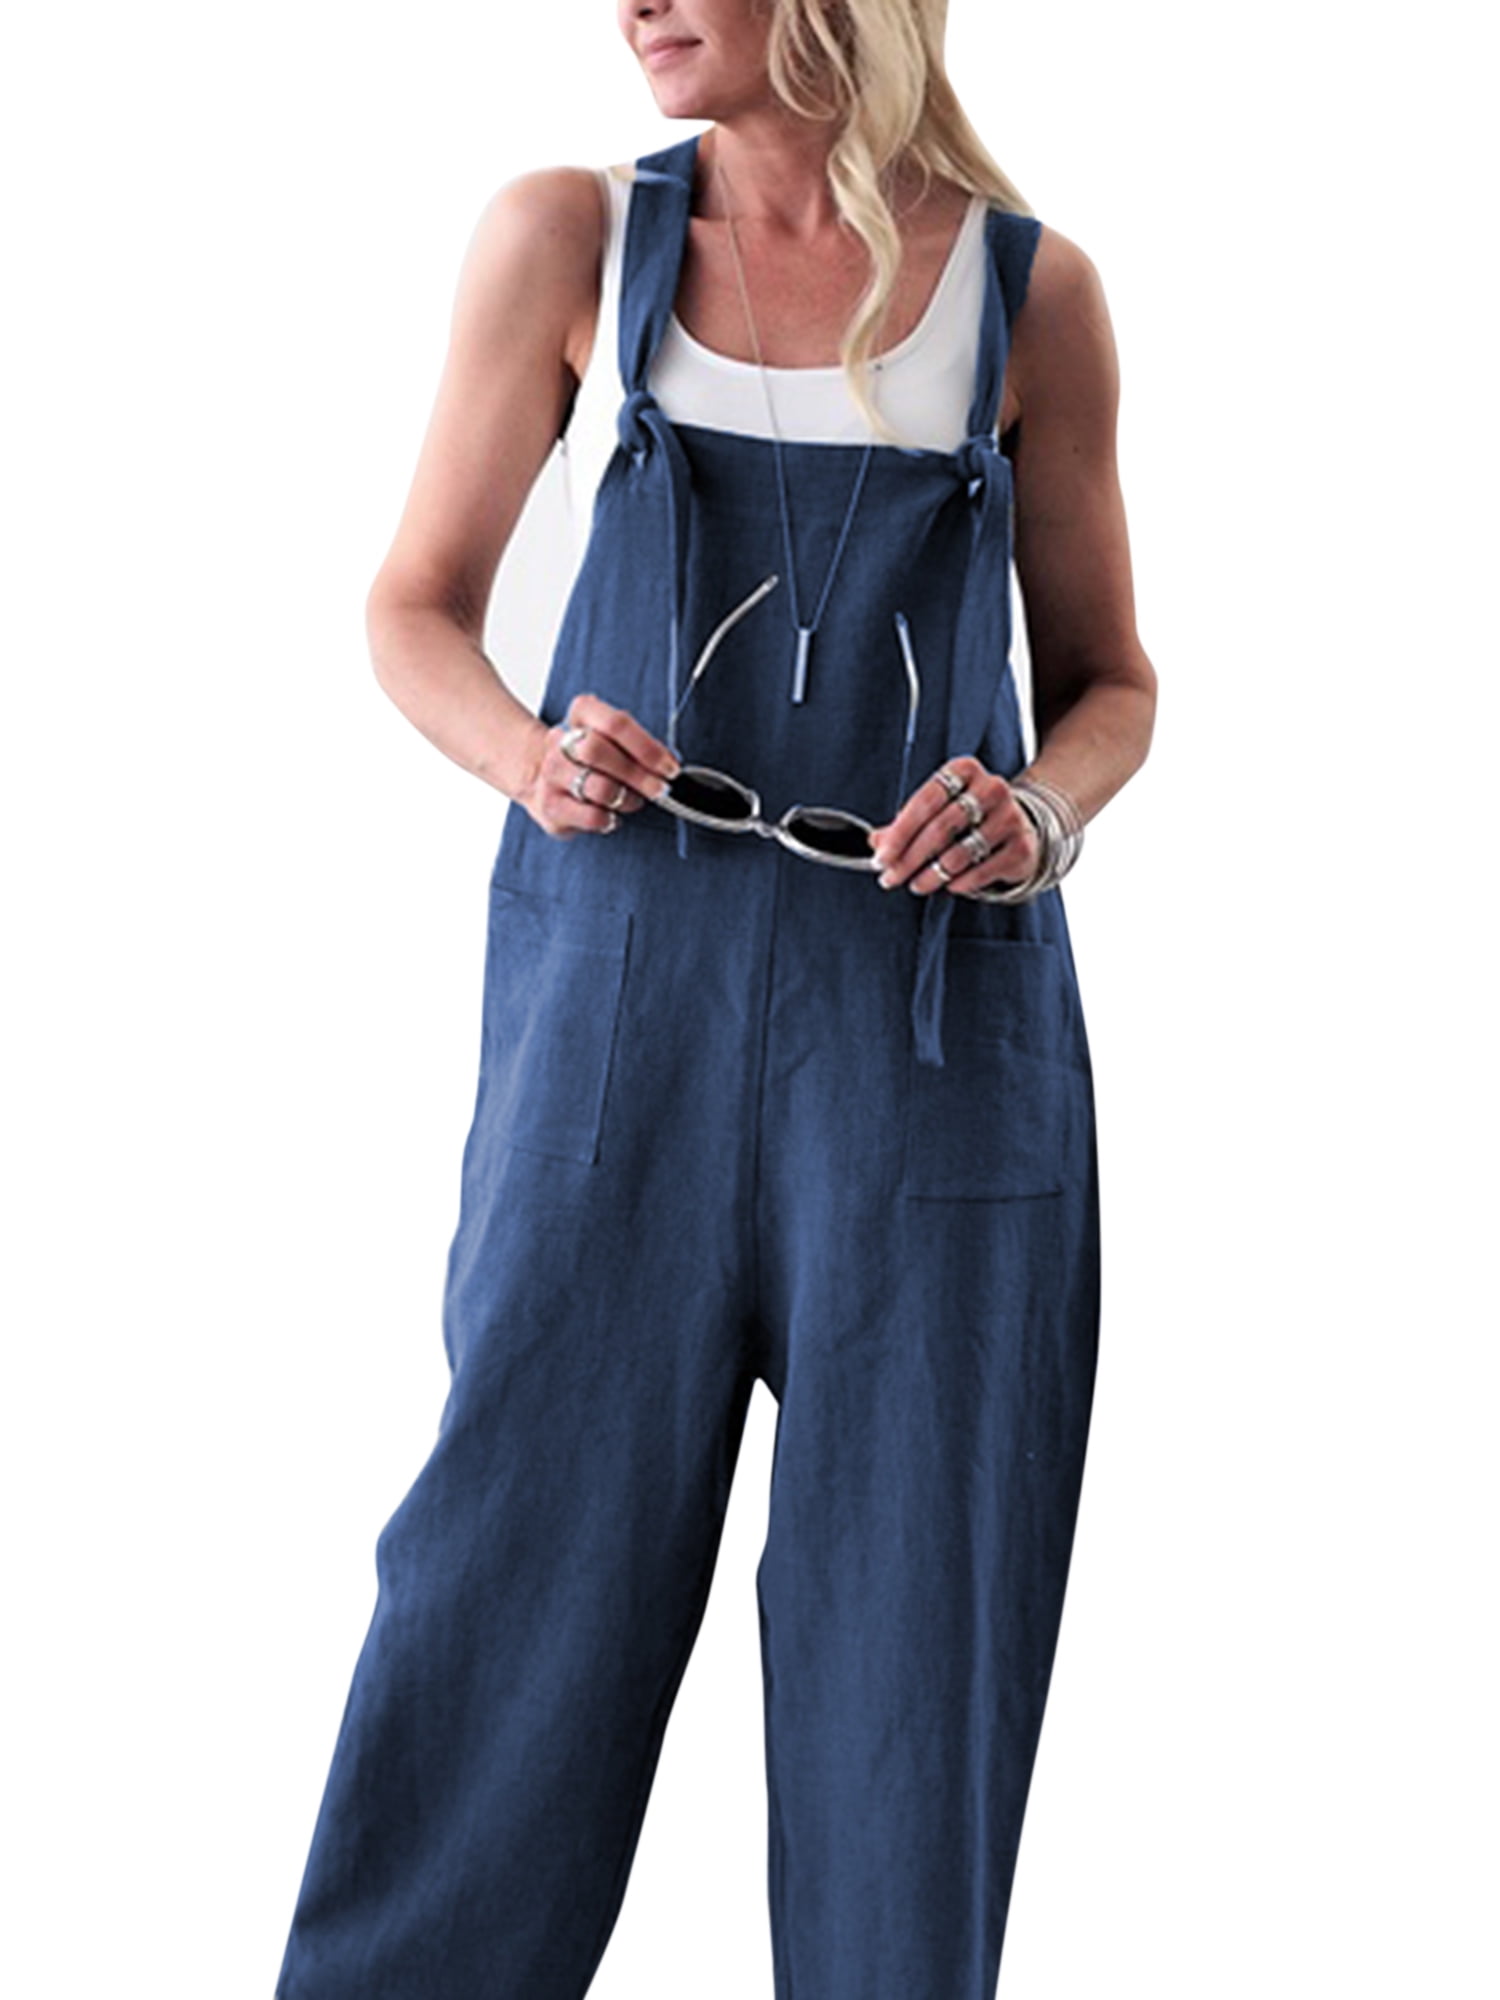 Cromoncent Womens Stylish Summer Casual Loose Jumpsuits Washed Denim Overalls